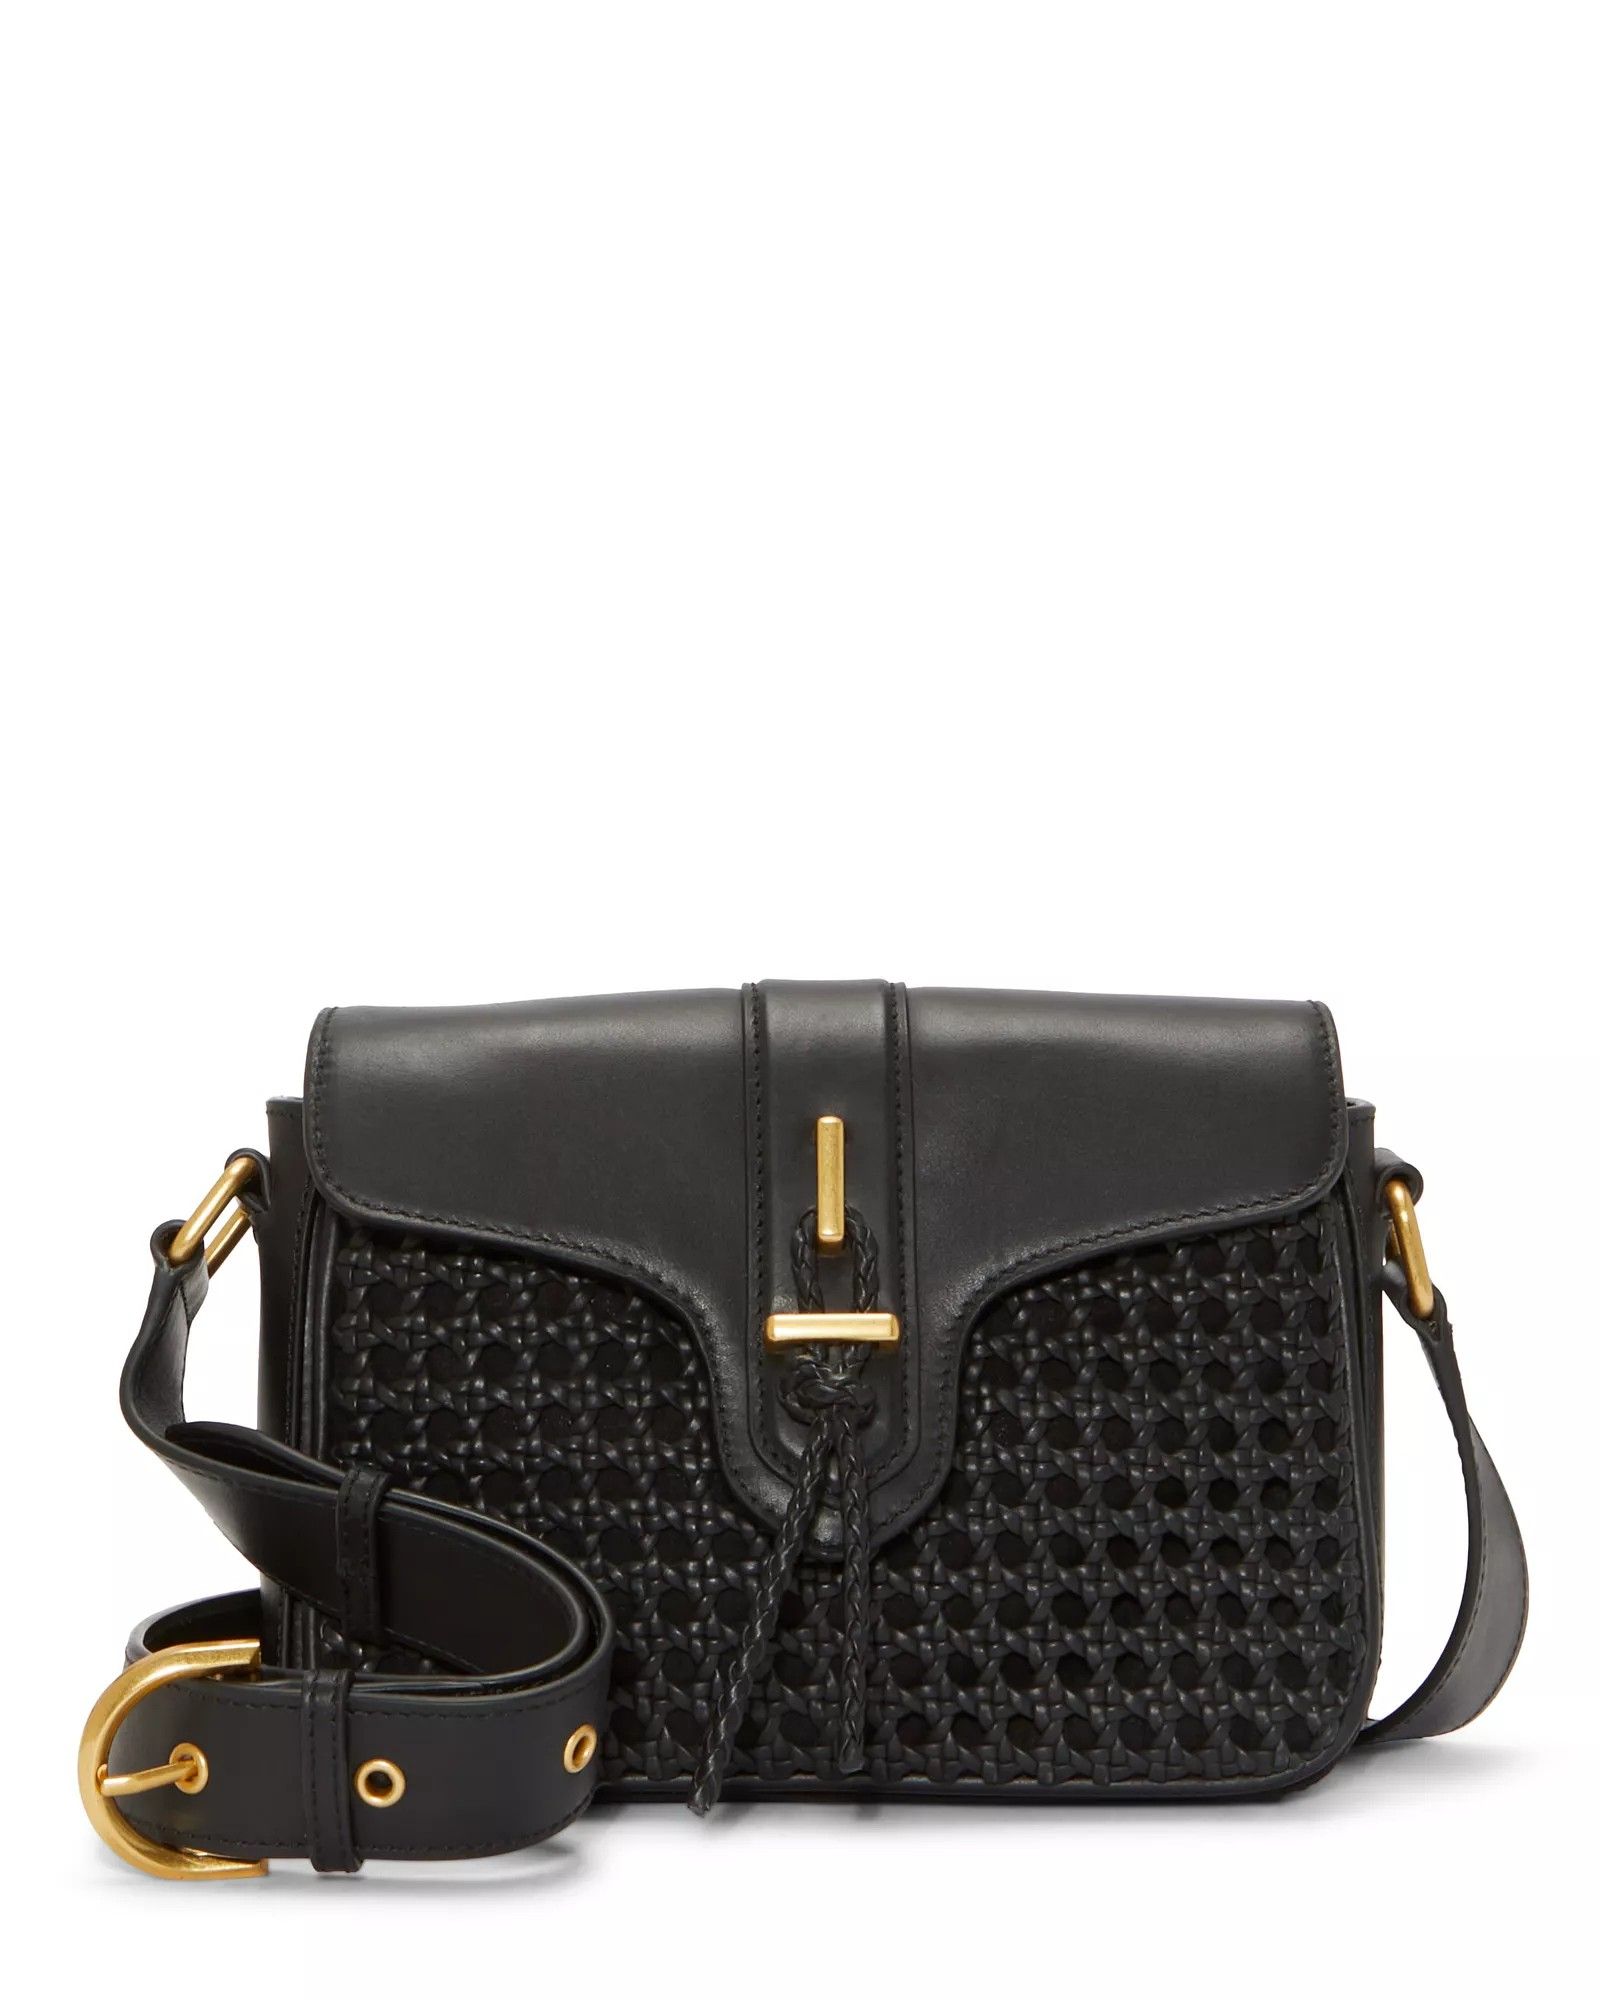 Vince Camuto Maecy Crossbody Bag | Vince Camuto